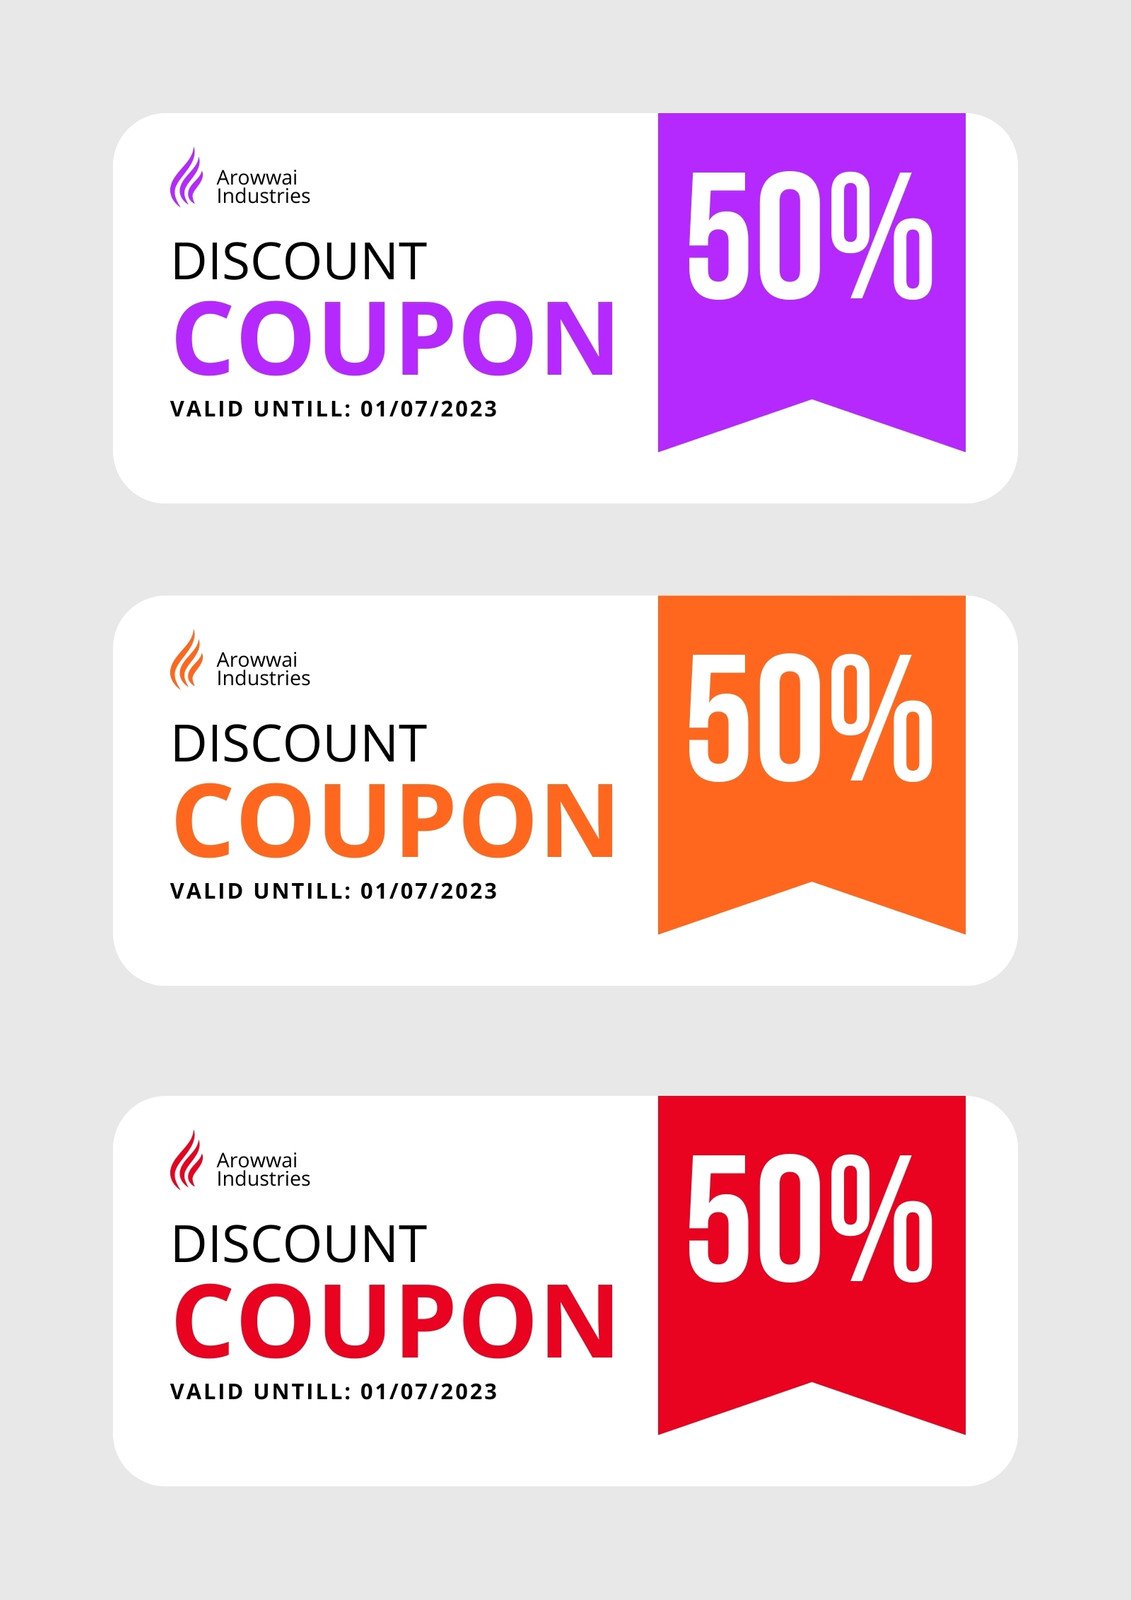 https://marketplace.canva.com/EAFLELmqaEQ/1/0/1131w/canva-white-colorful-discount-coupon-Y-WrOnBlWMQ.jpg